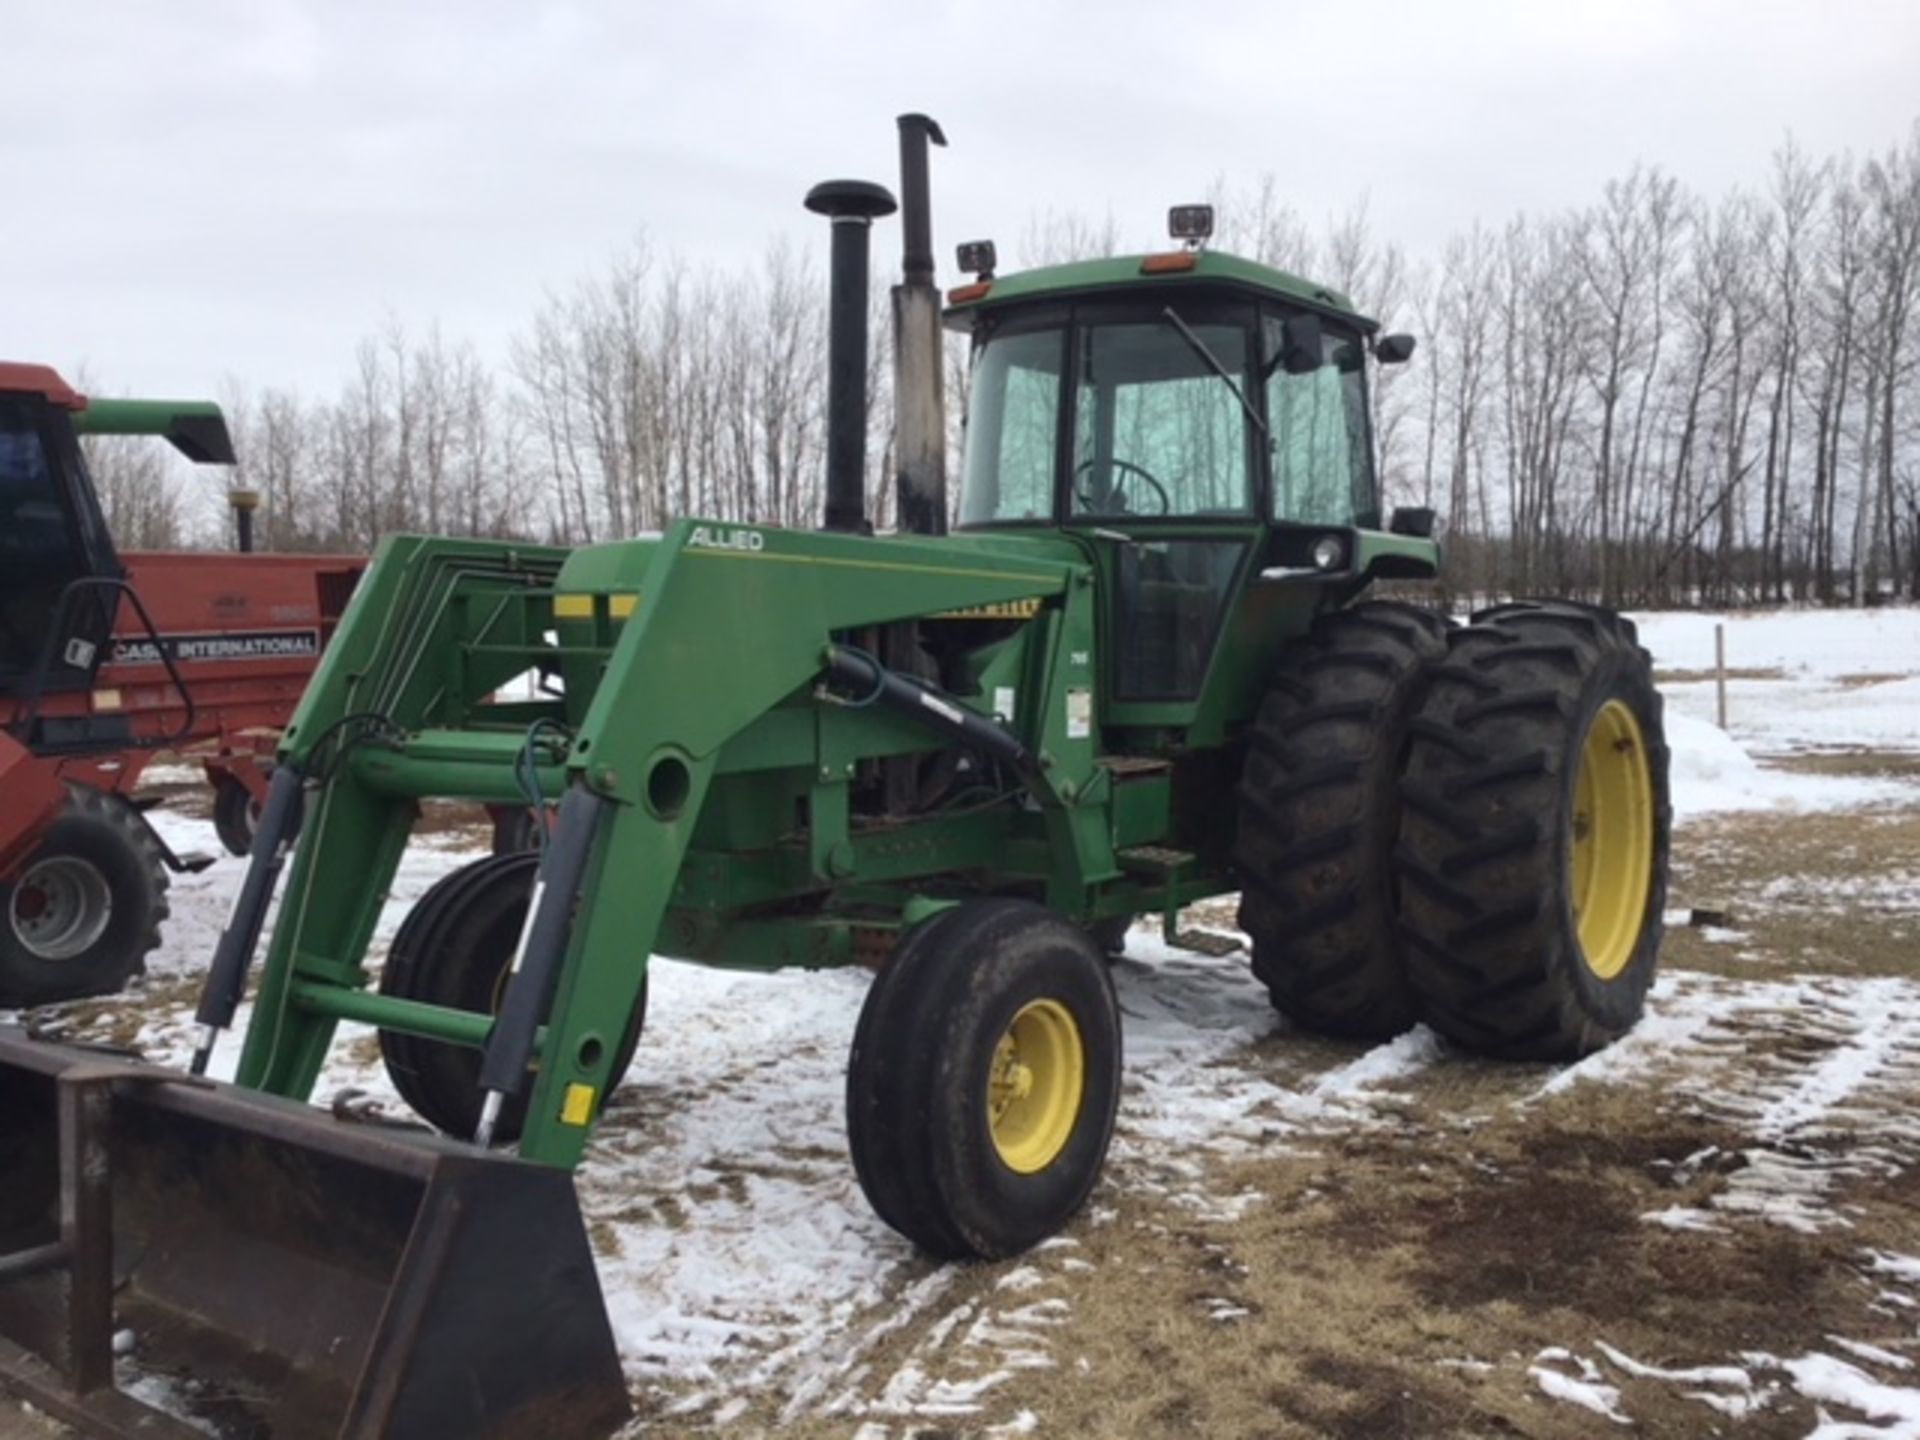 John Deere 4630 2wd Tractor 12543hrs, 20.8-38rr Duals, Drop in Eng 400hrs ago, (Has 795 Allied Front - Image 6 of 6